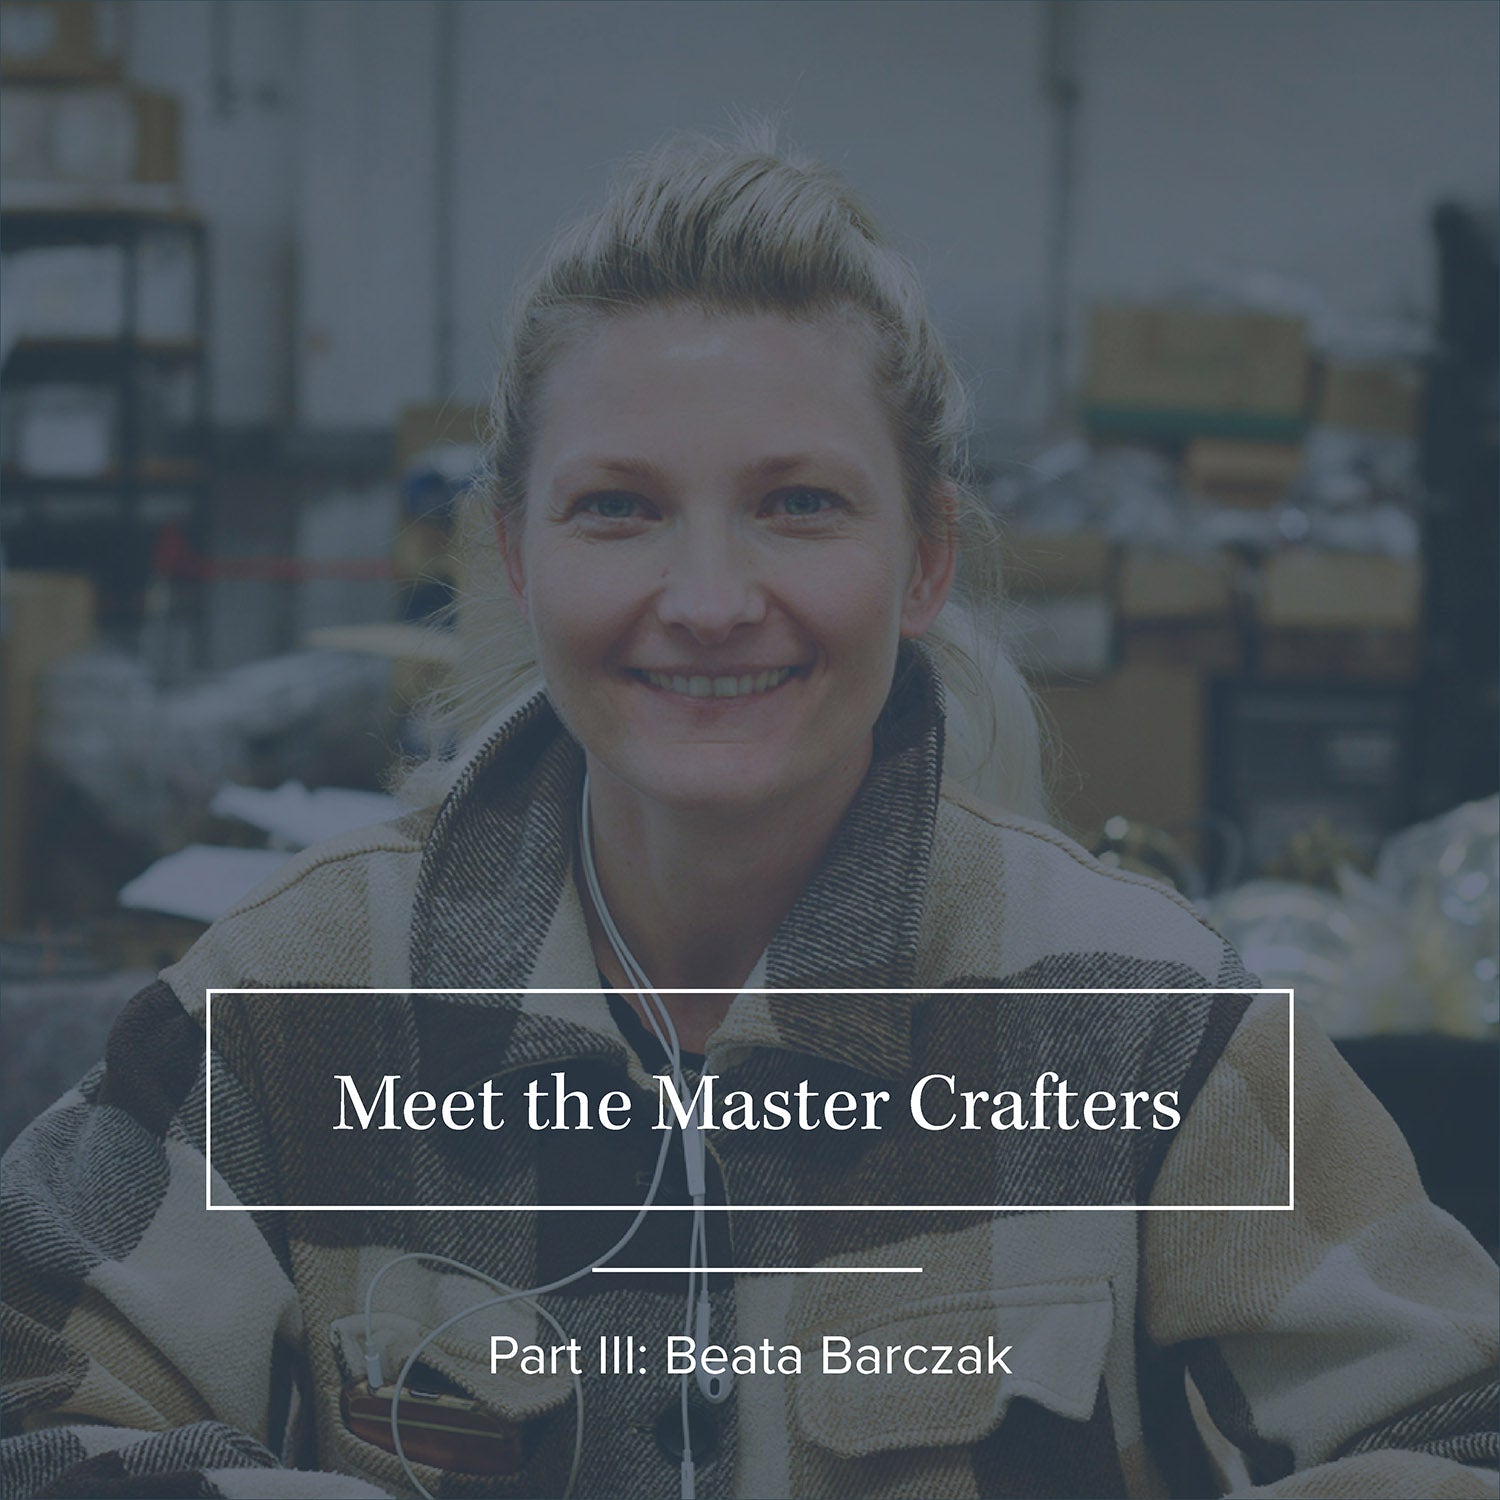 Meet the Master Crafters: Part III